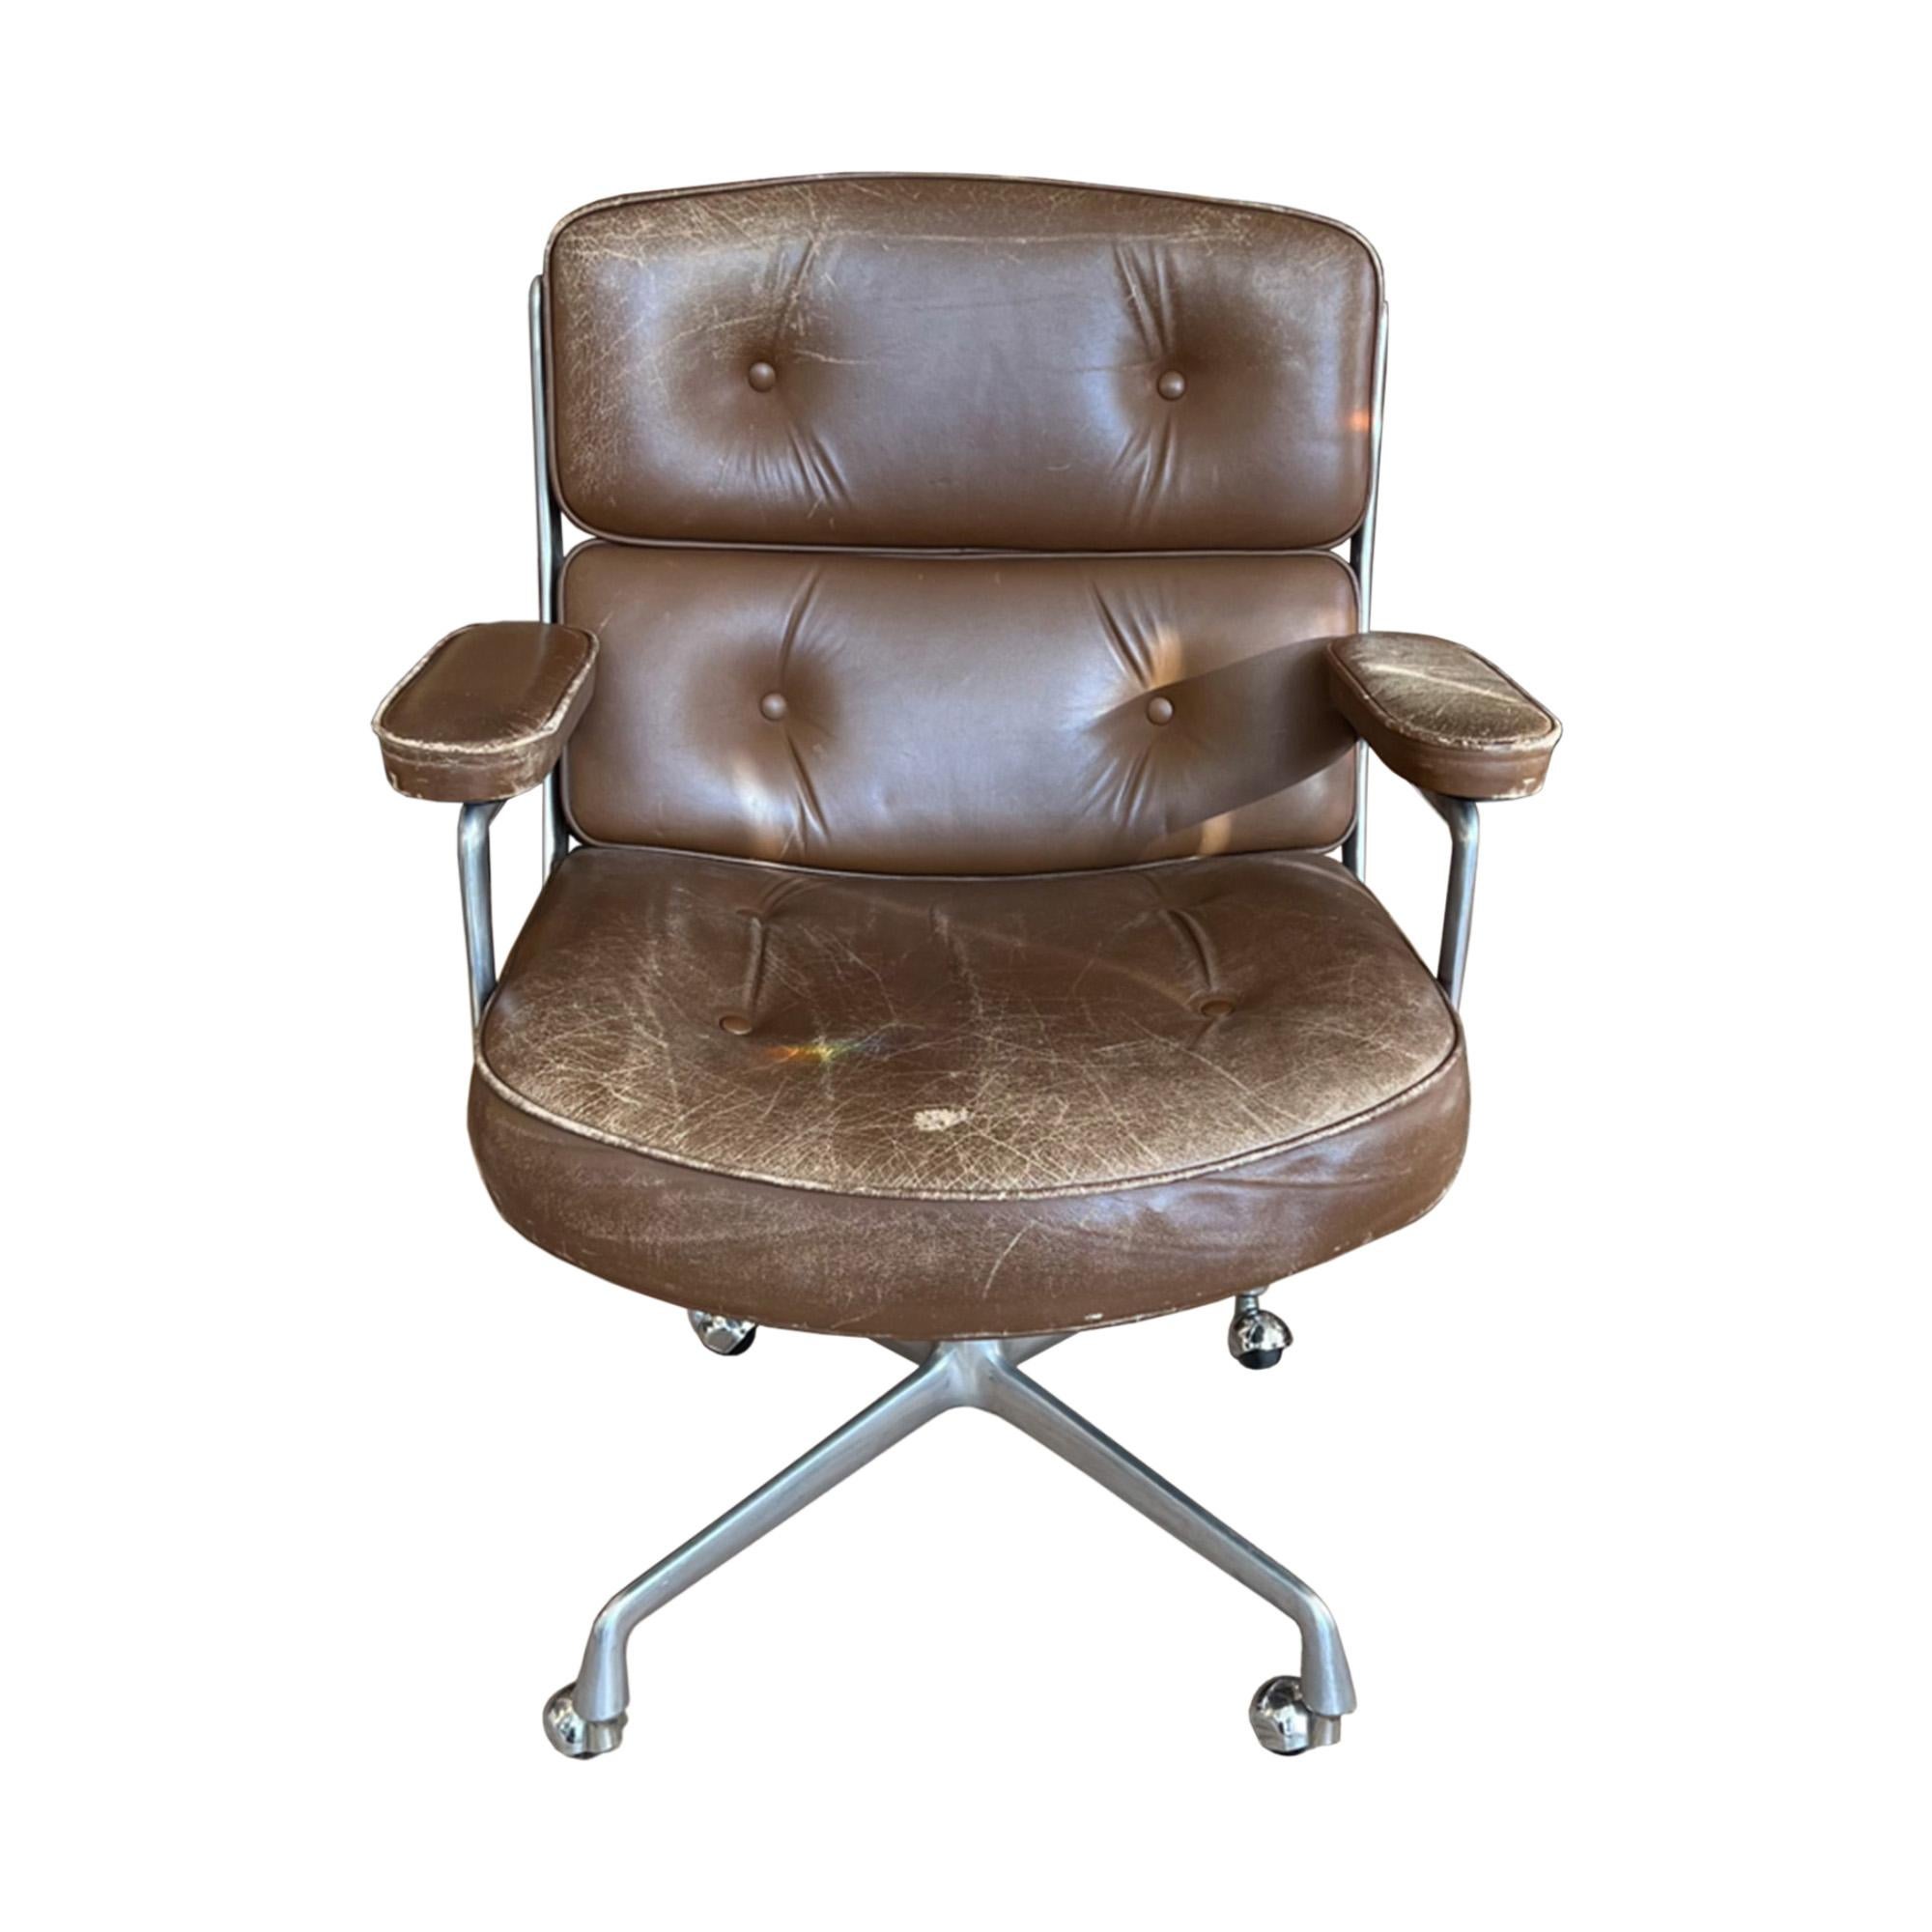 Here's a timeless classic - this Eames Time Life Lobby chair was made by Mobilier International, France in the 1960s. 

The chair sits on the original 4 castors, swivels around the full 360 degrees and the back reclines when you lean into it. 

As